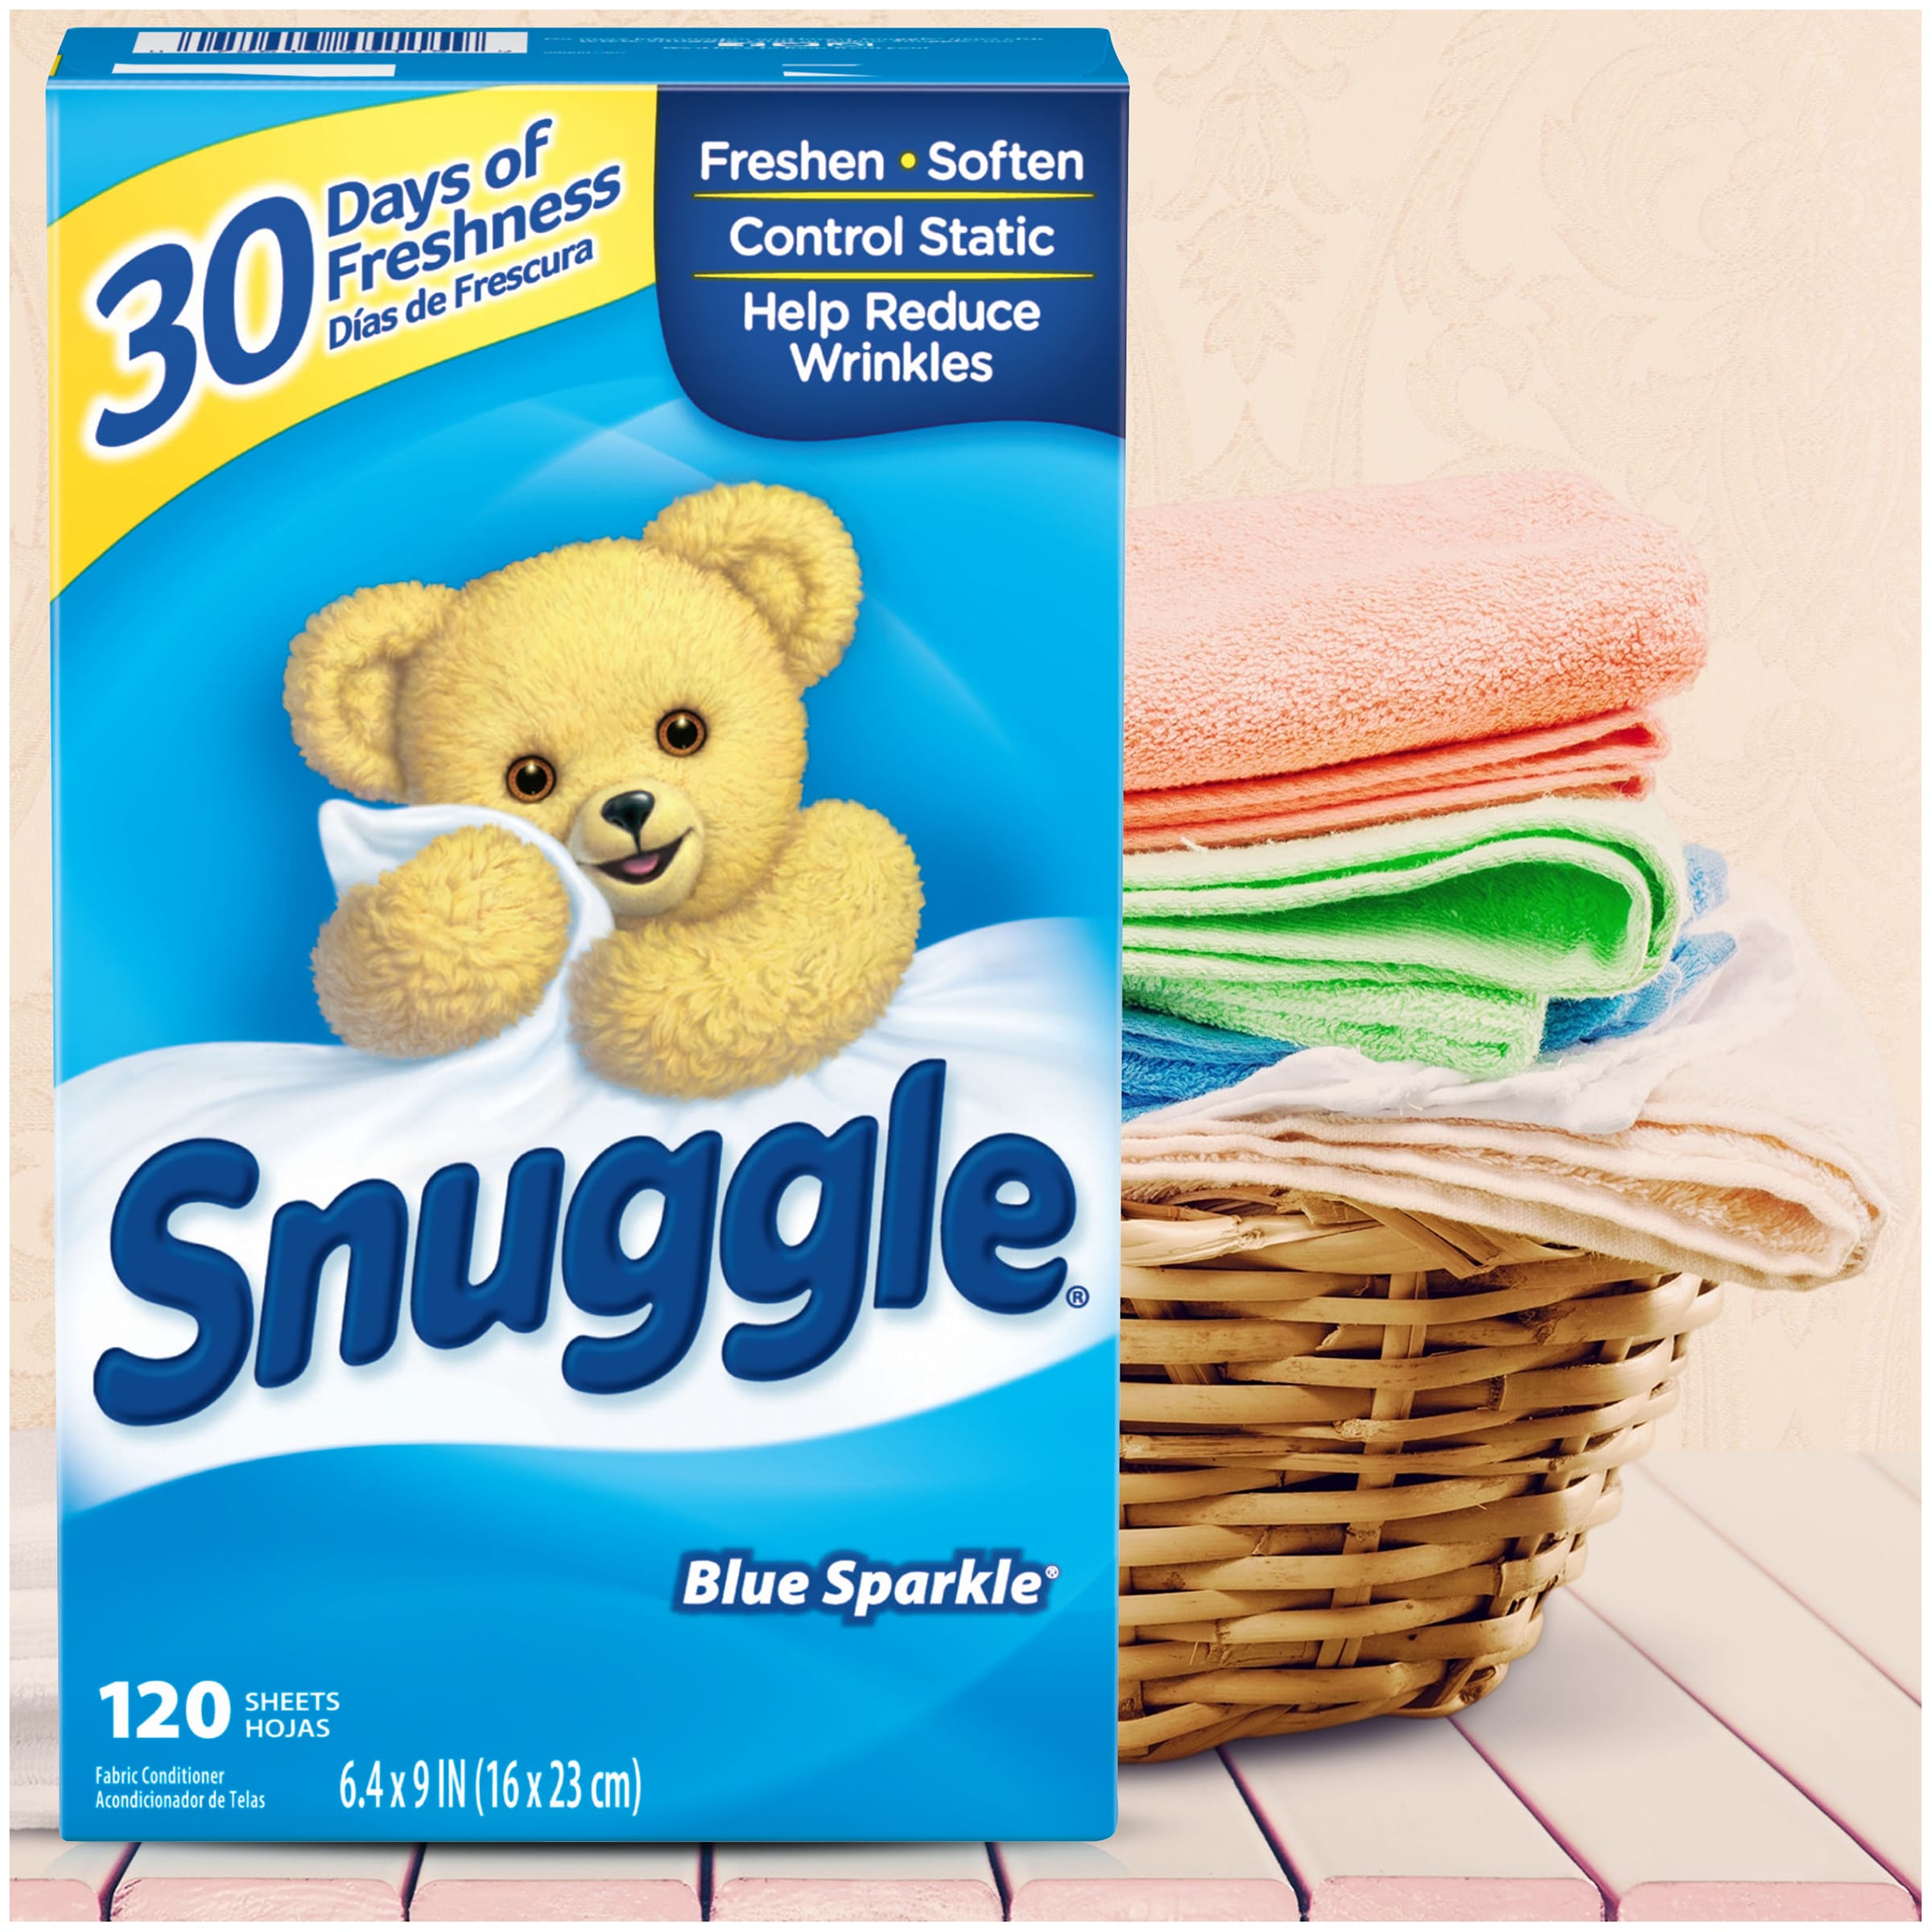 Snuggle Blue Sparkle Fabric Softener Dryer Sheets - Shop Softeners at H-E-B